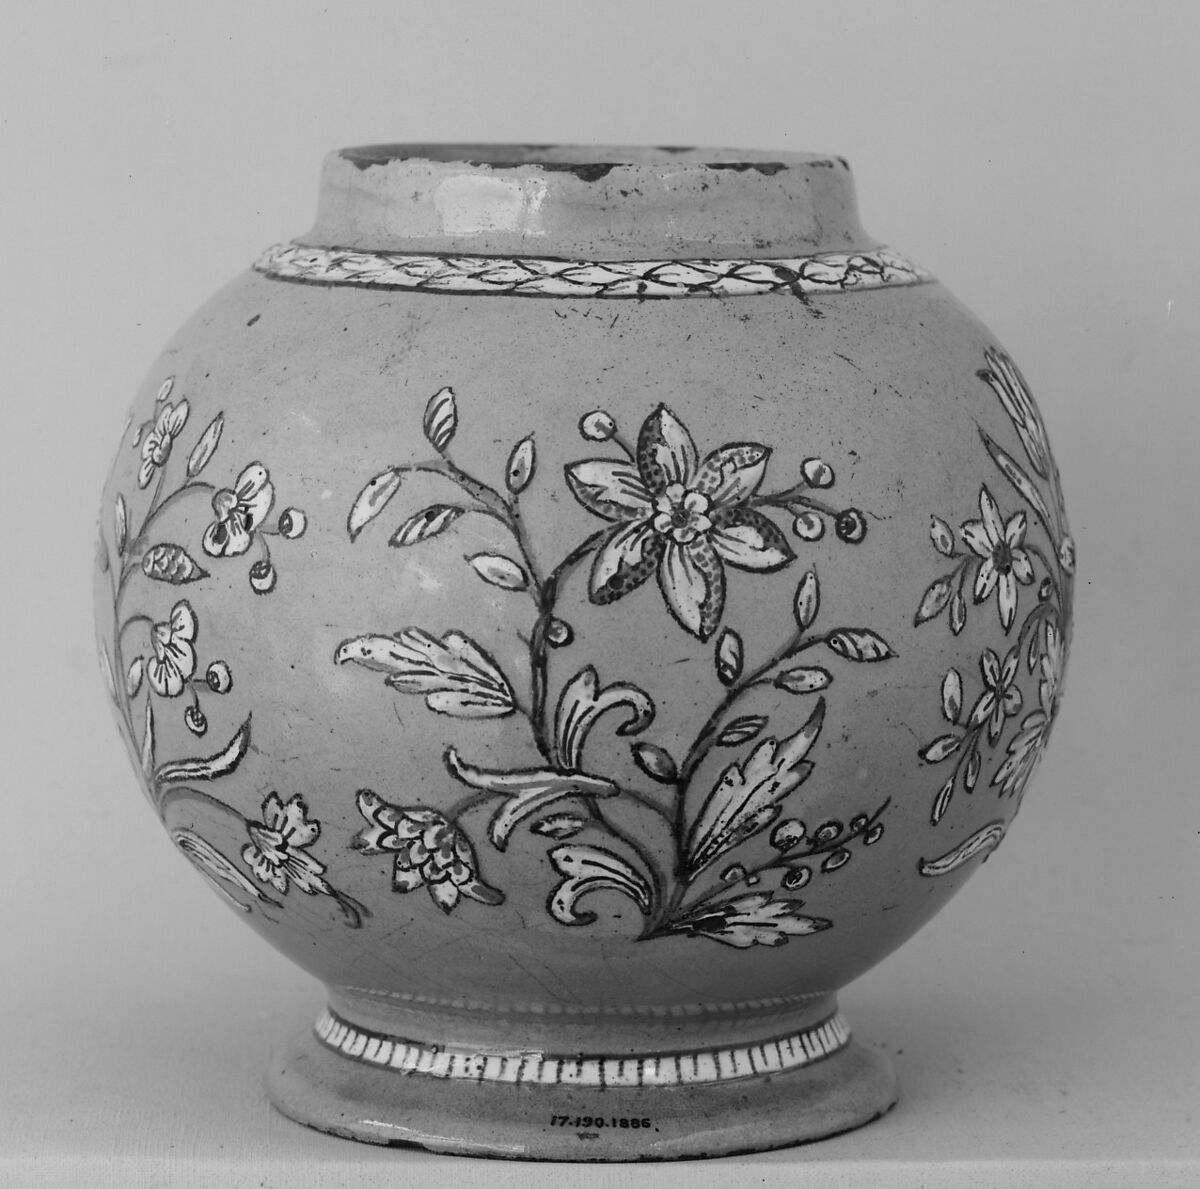 Vase (part of a set), Faience (tin-glazed earthenware), possibly French, Rouen 